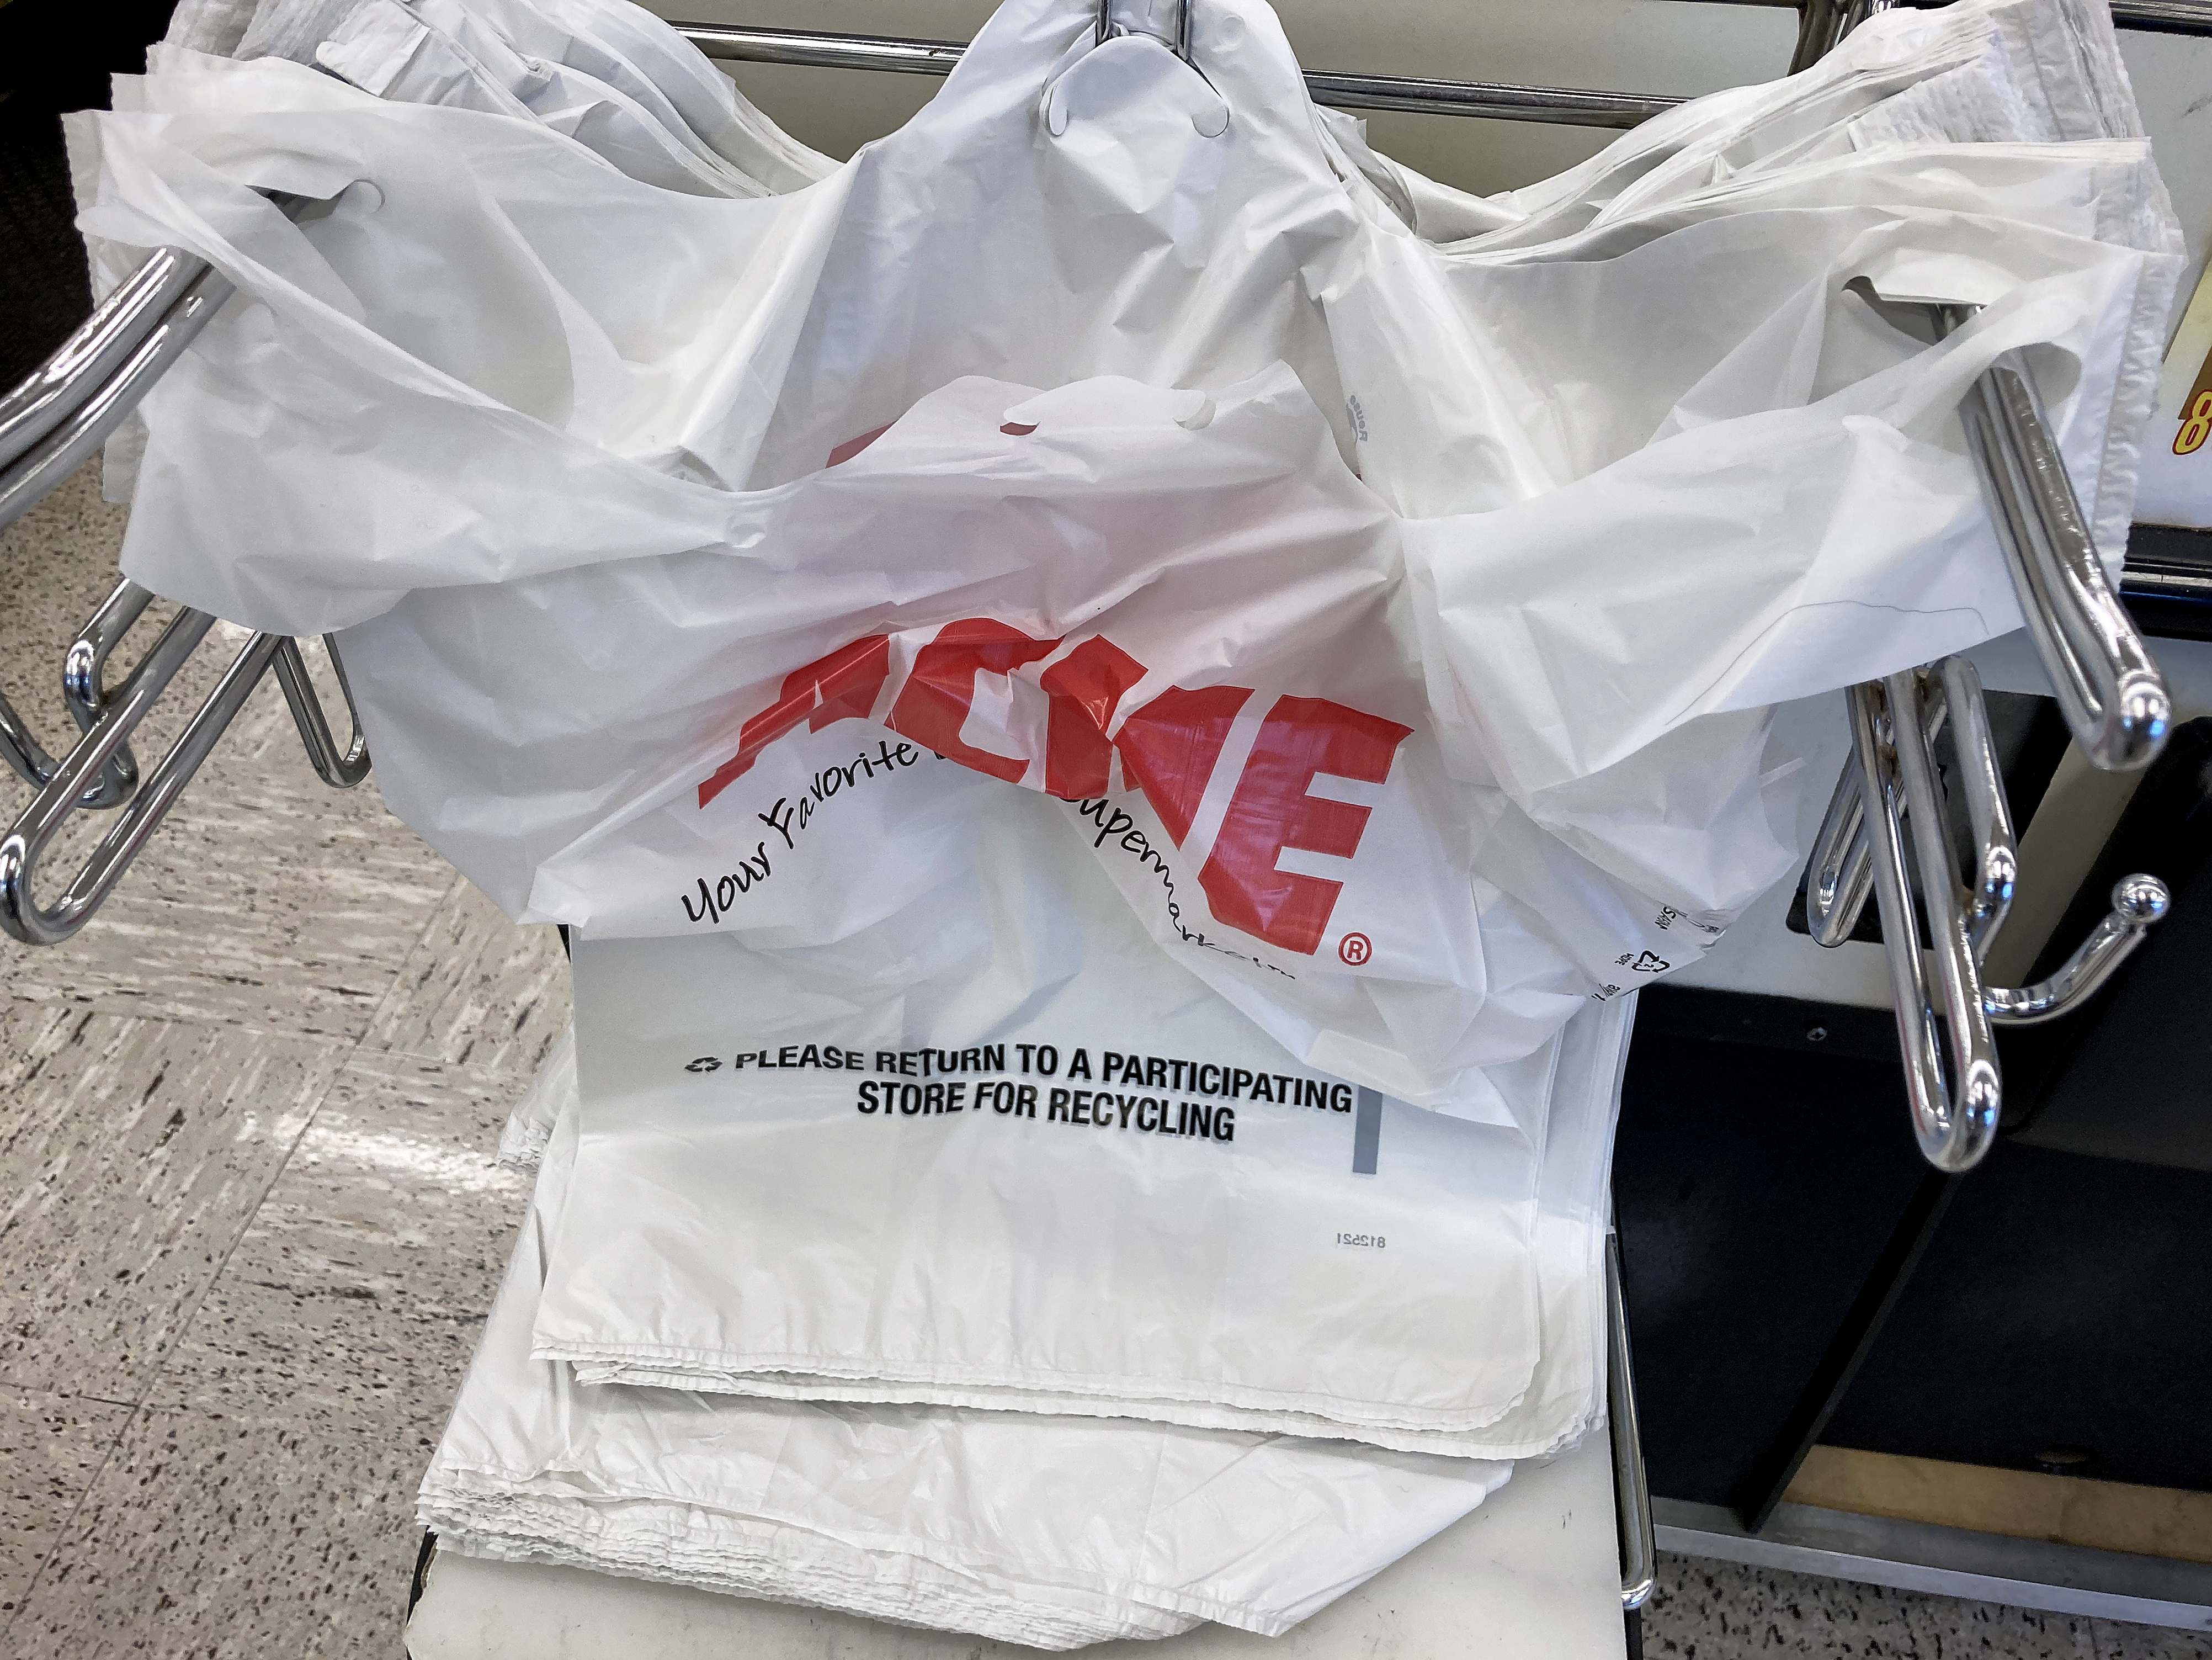 Boston just officially banned single-use plastic bags